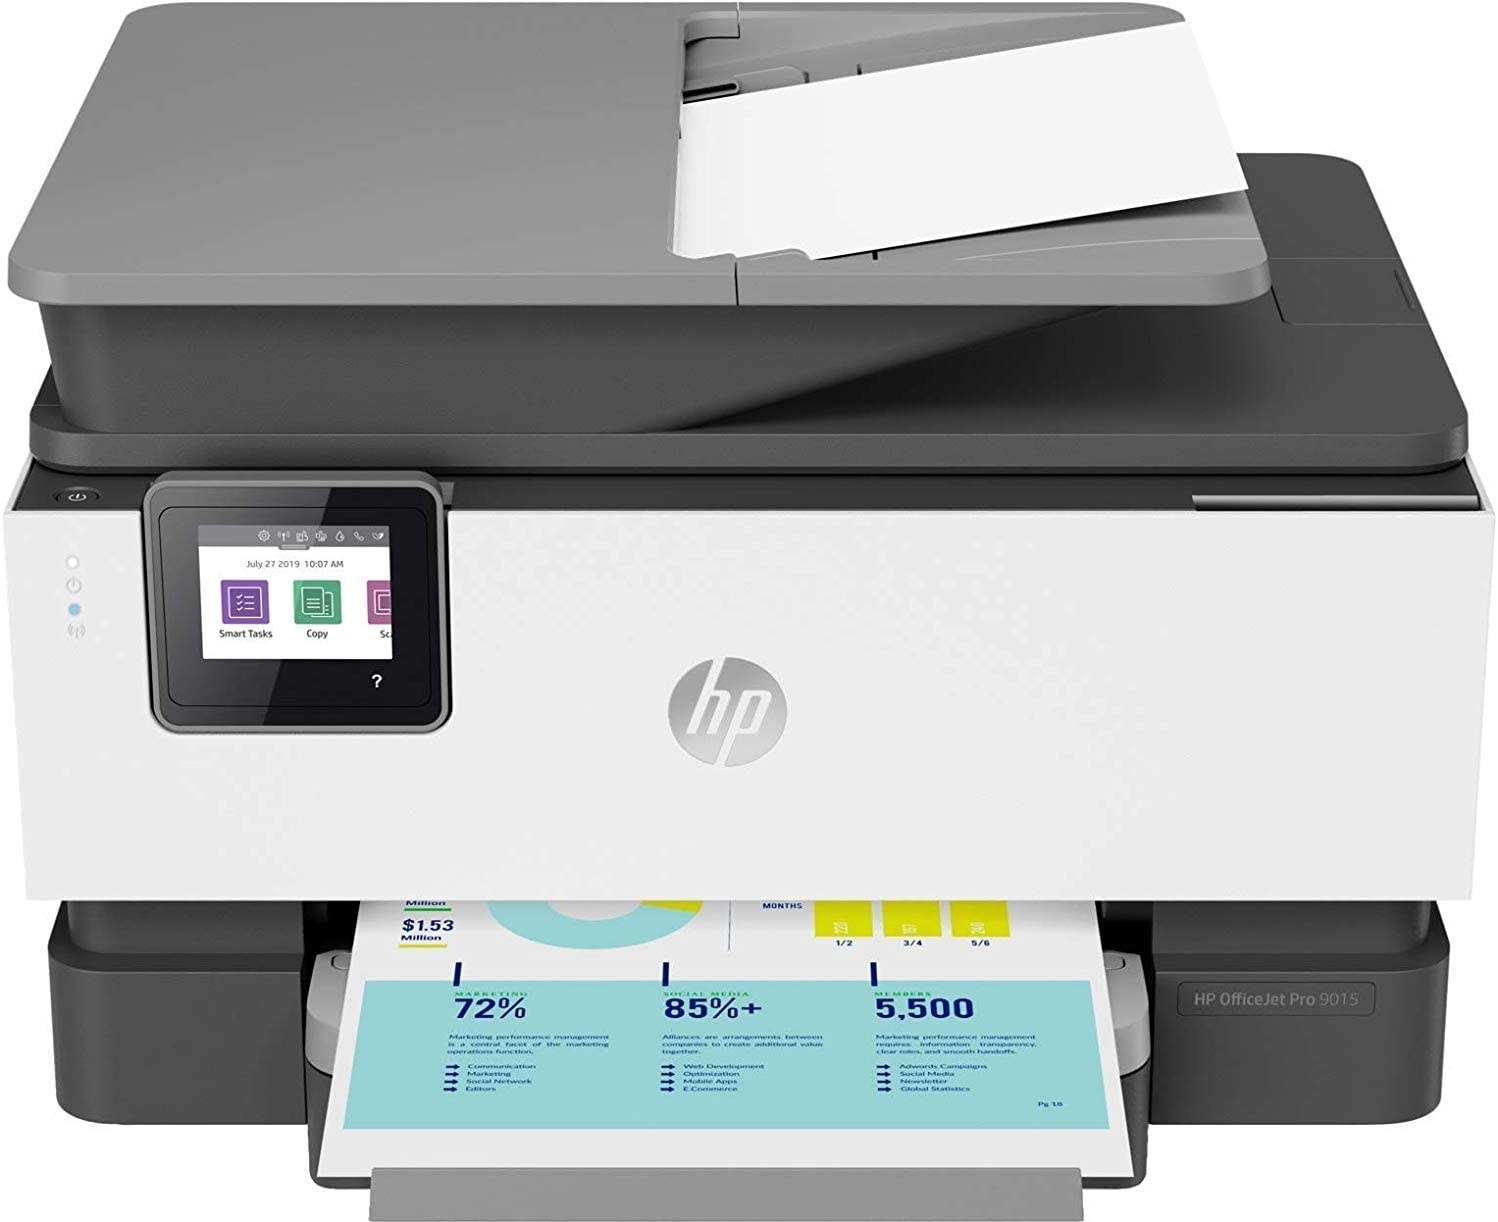 A larger printer with a paper feeder attachment on top